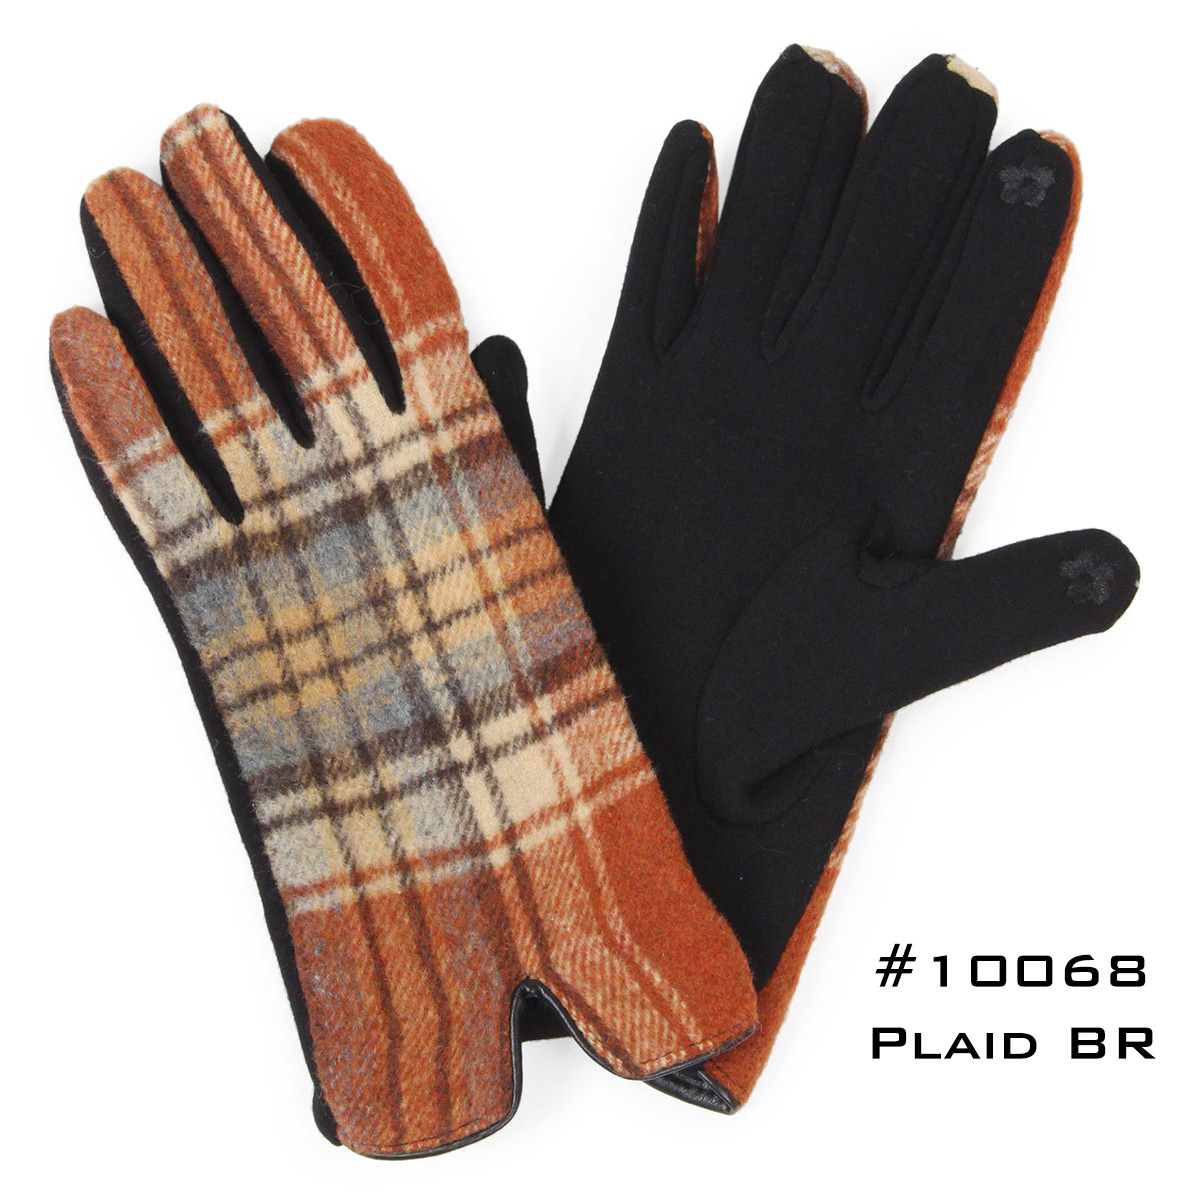 2390 - Touch Screen Smart Gloves 10068-MU<br> Mustard Plaid  - One Size Fits Most